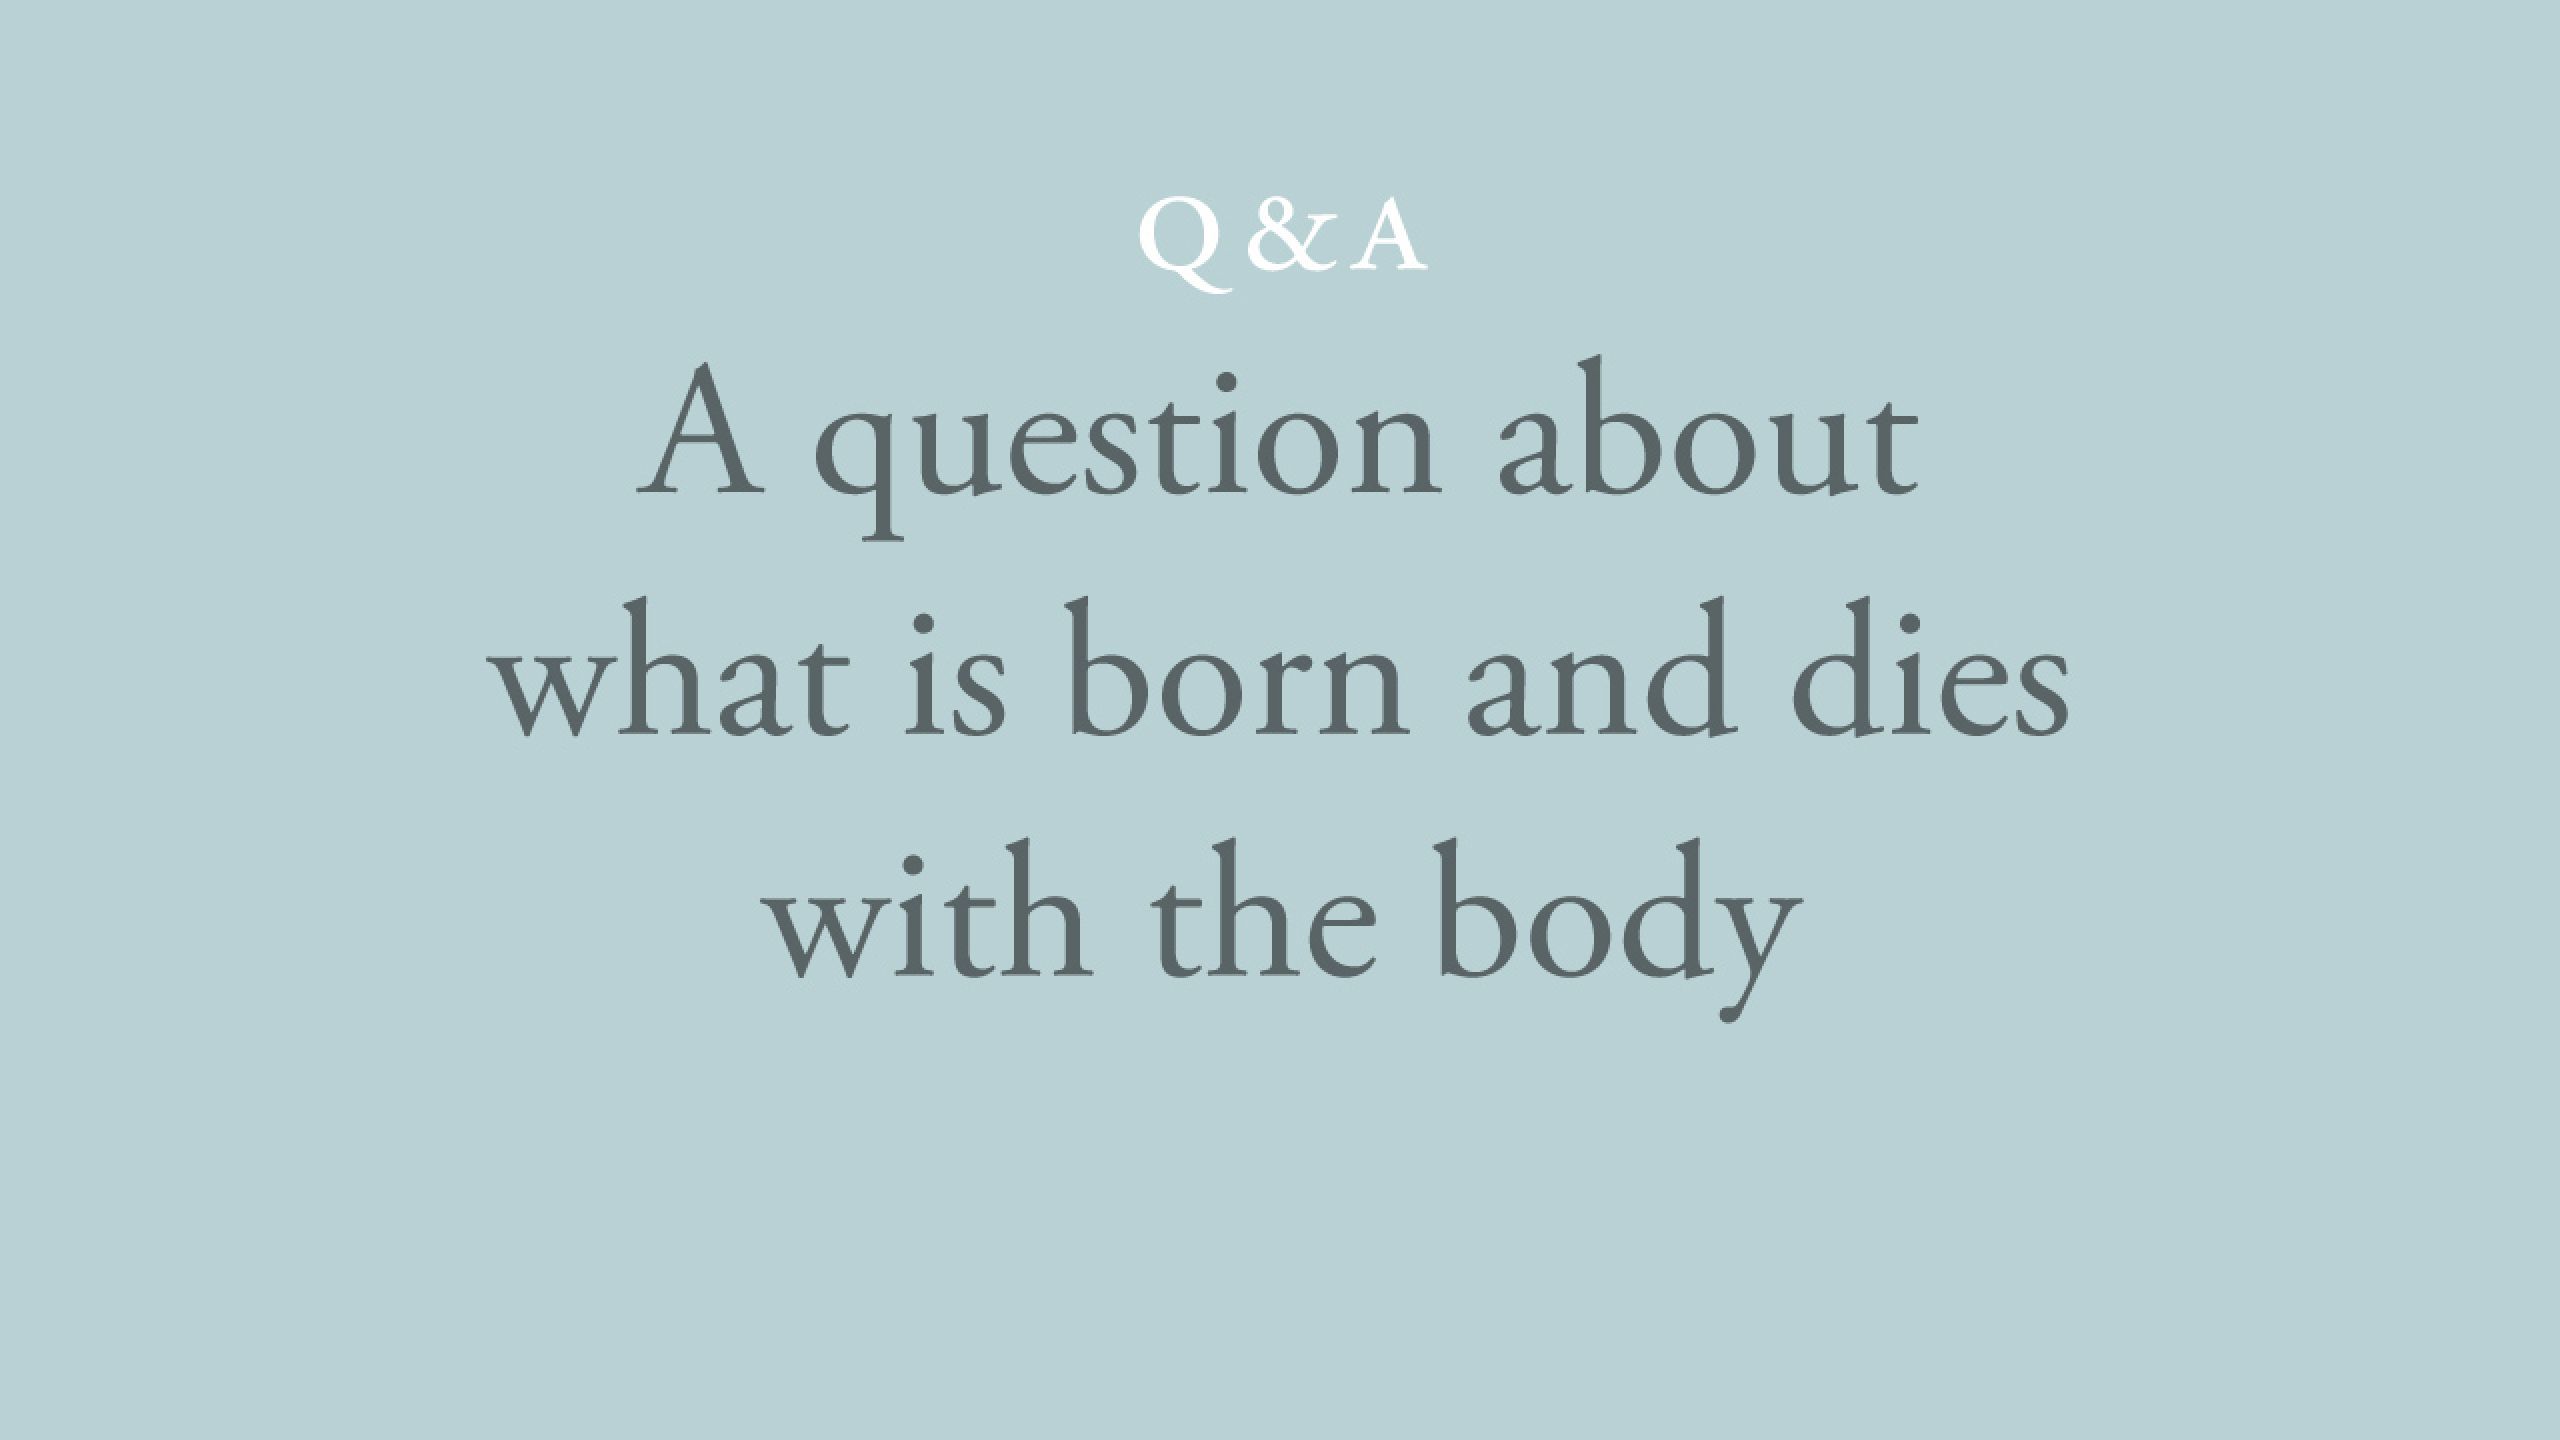 What is it that is born and dies with the body?